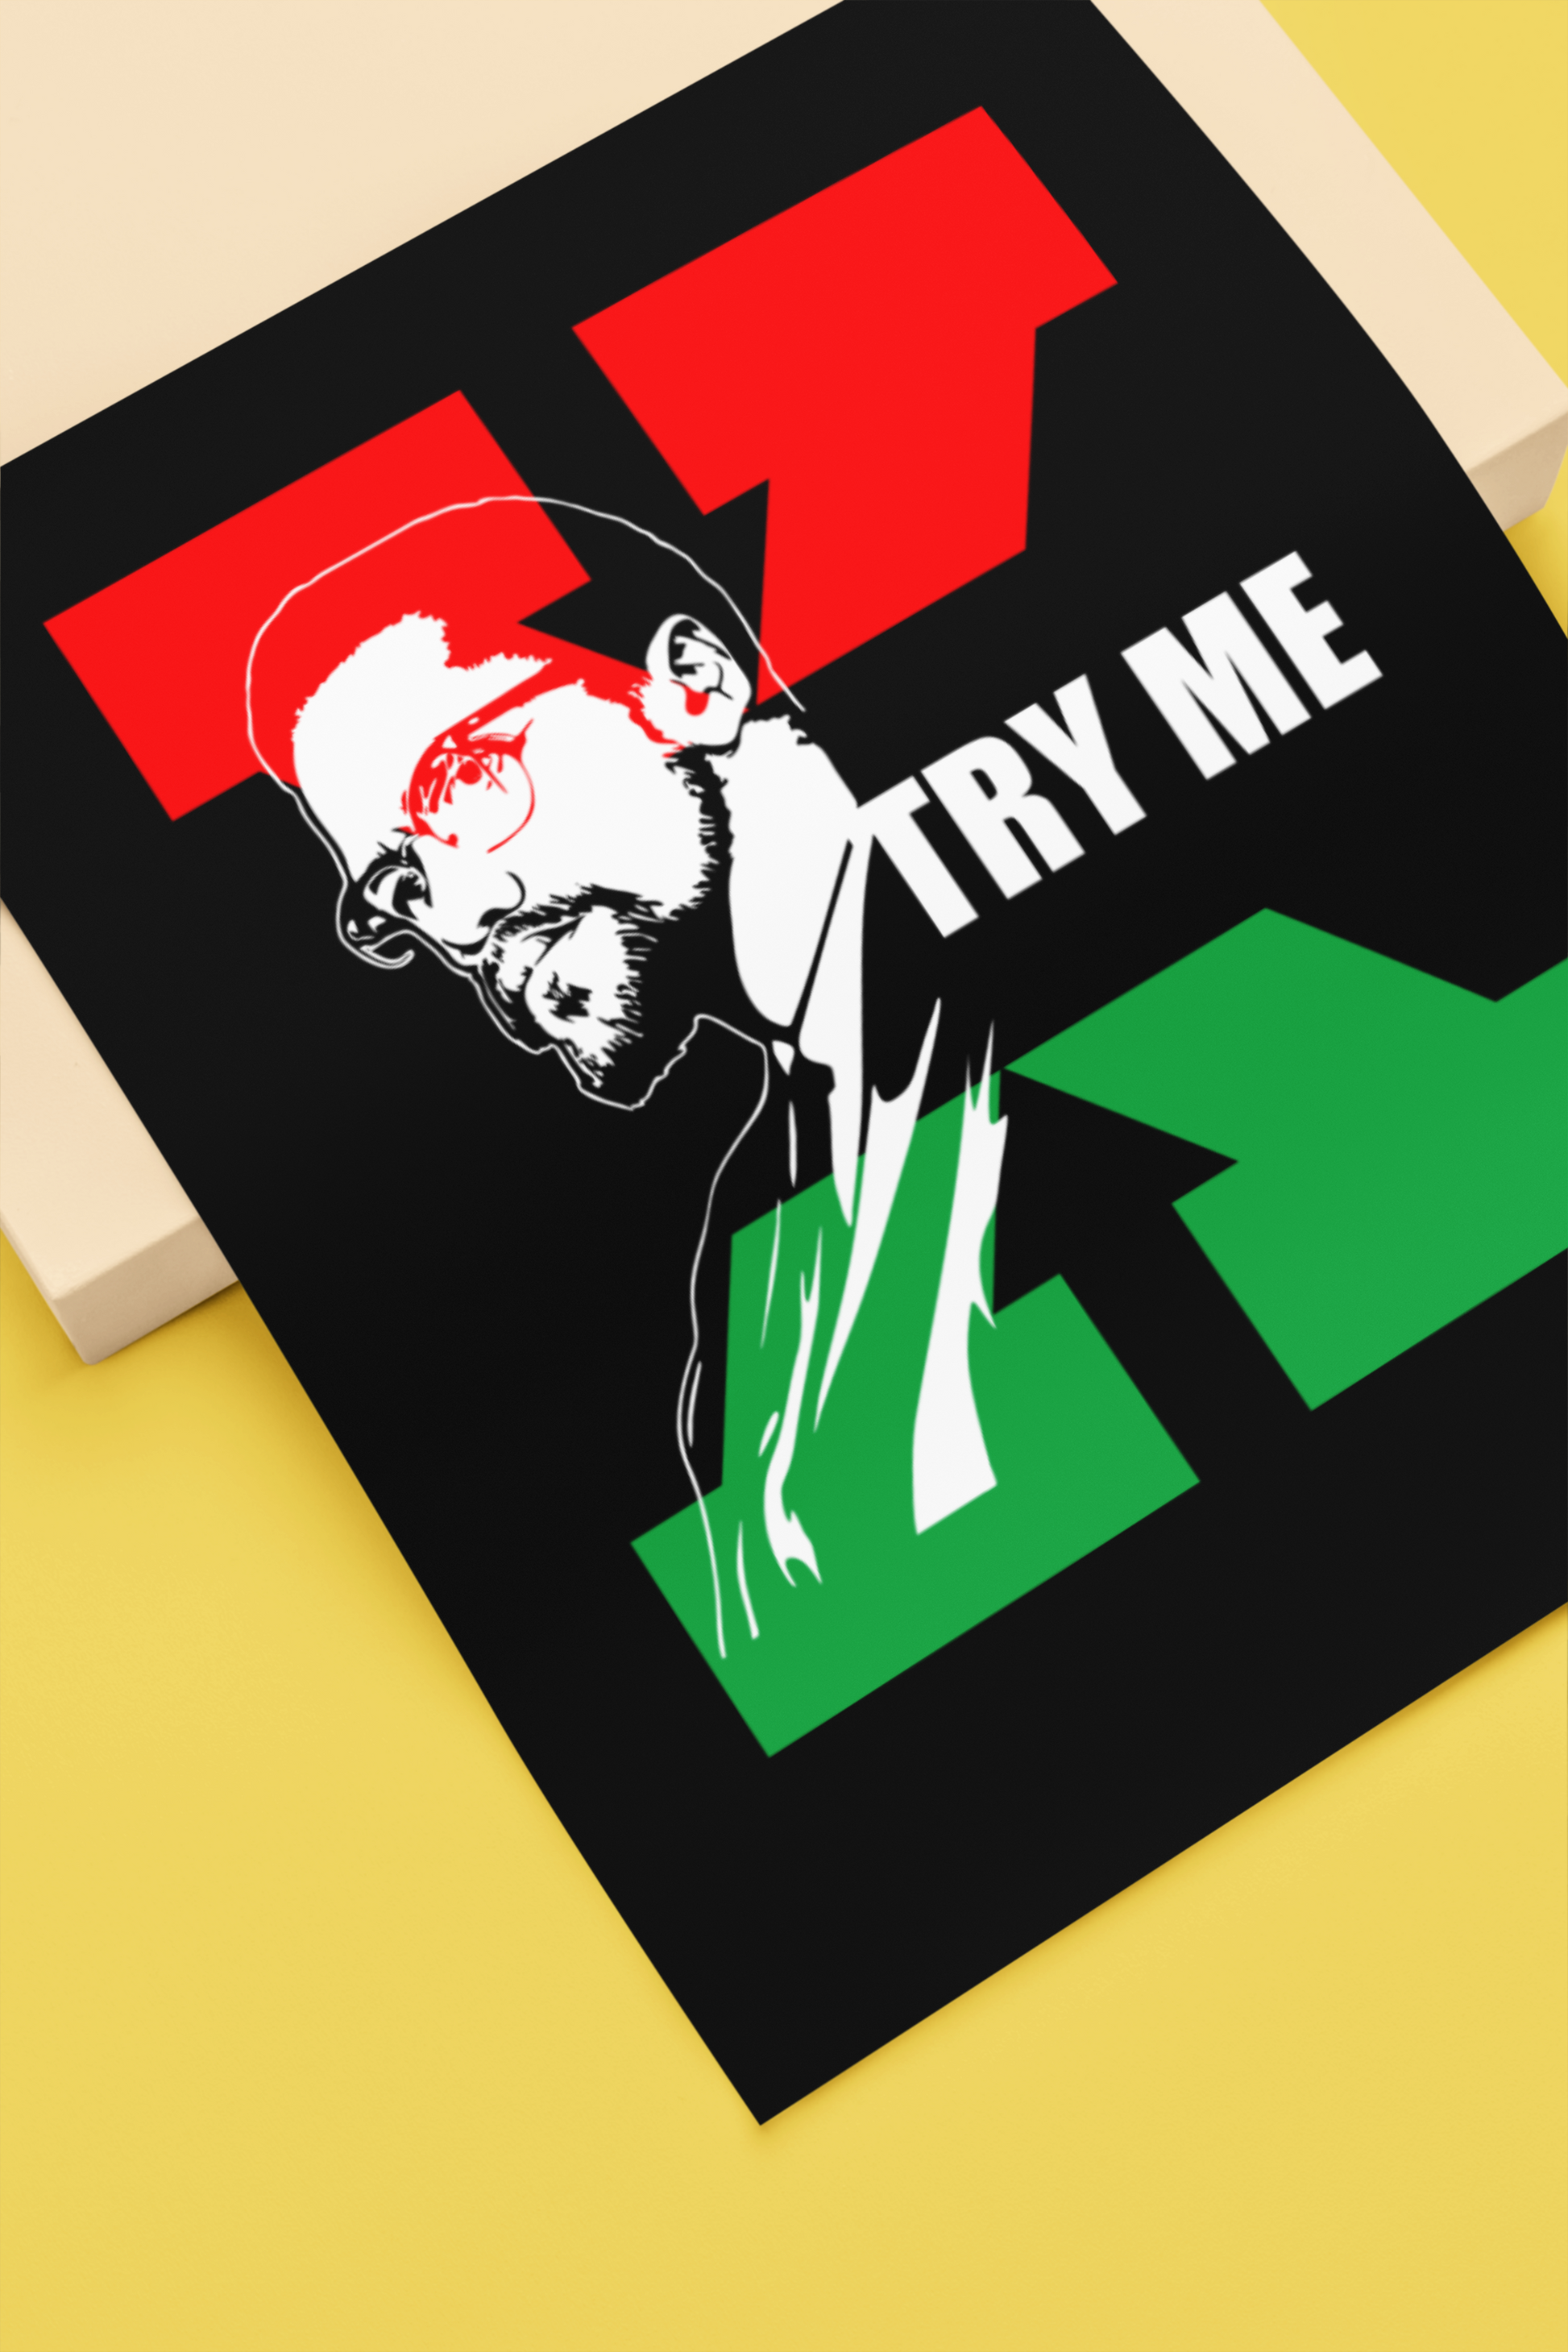 a sketch of Malcolm X with a Red and Green X behind him and the words "Try Me' next to him in white letters.